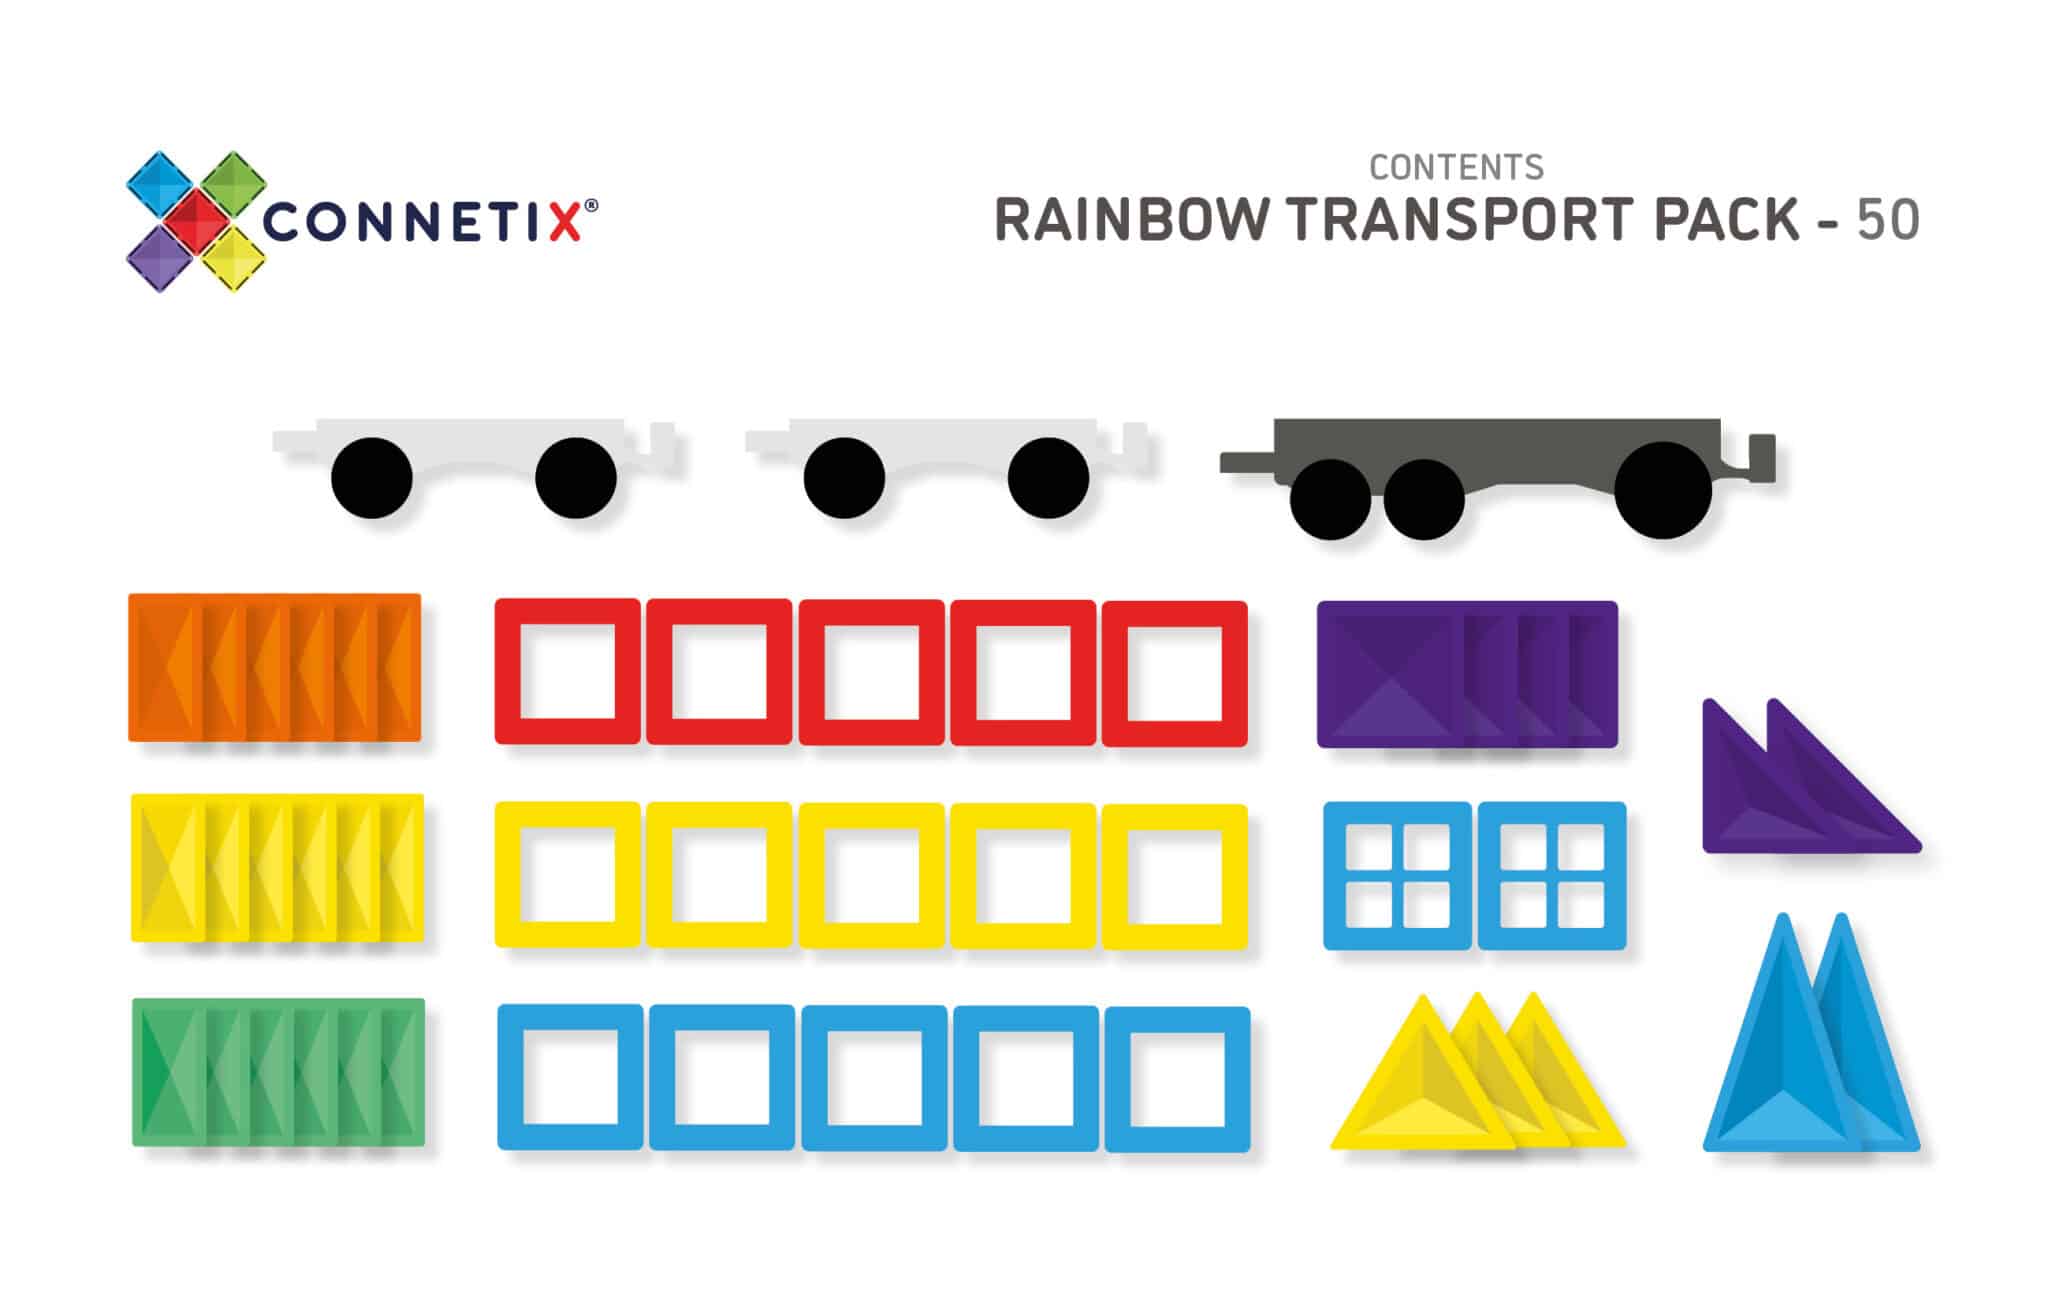 50-Rainbow-Transport-Pack-Contents-scaled